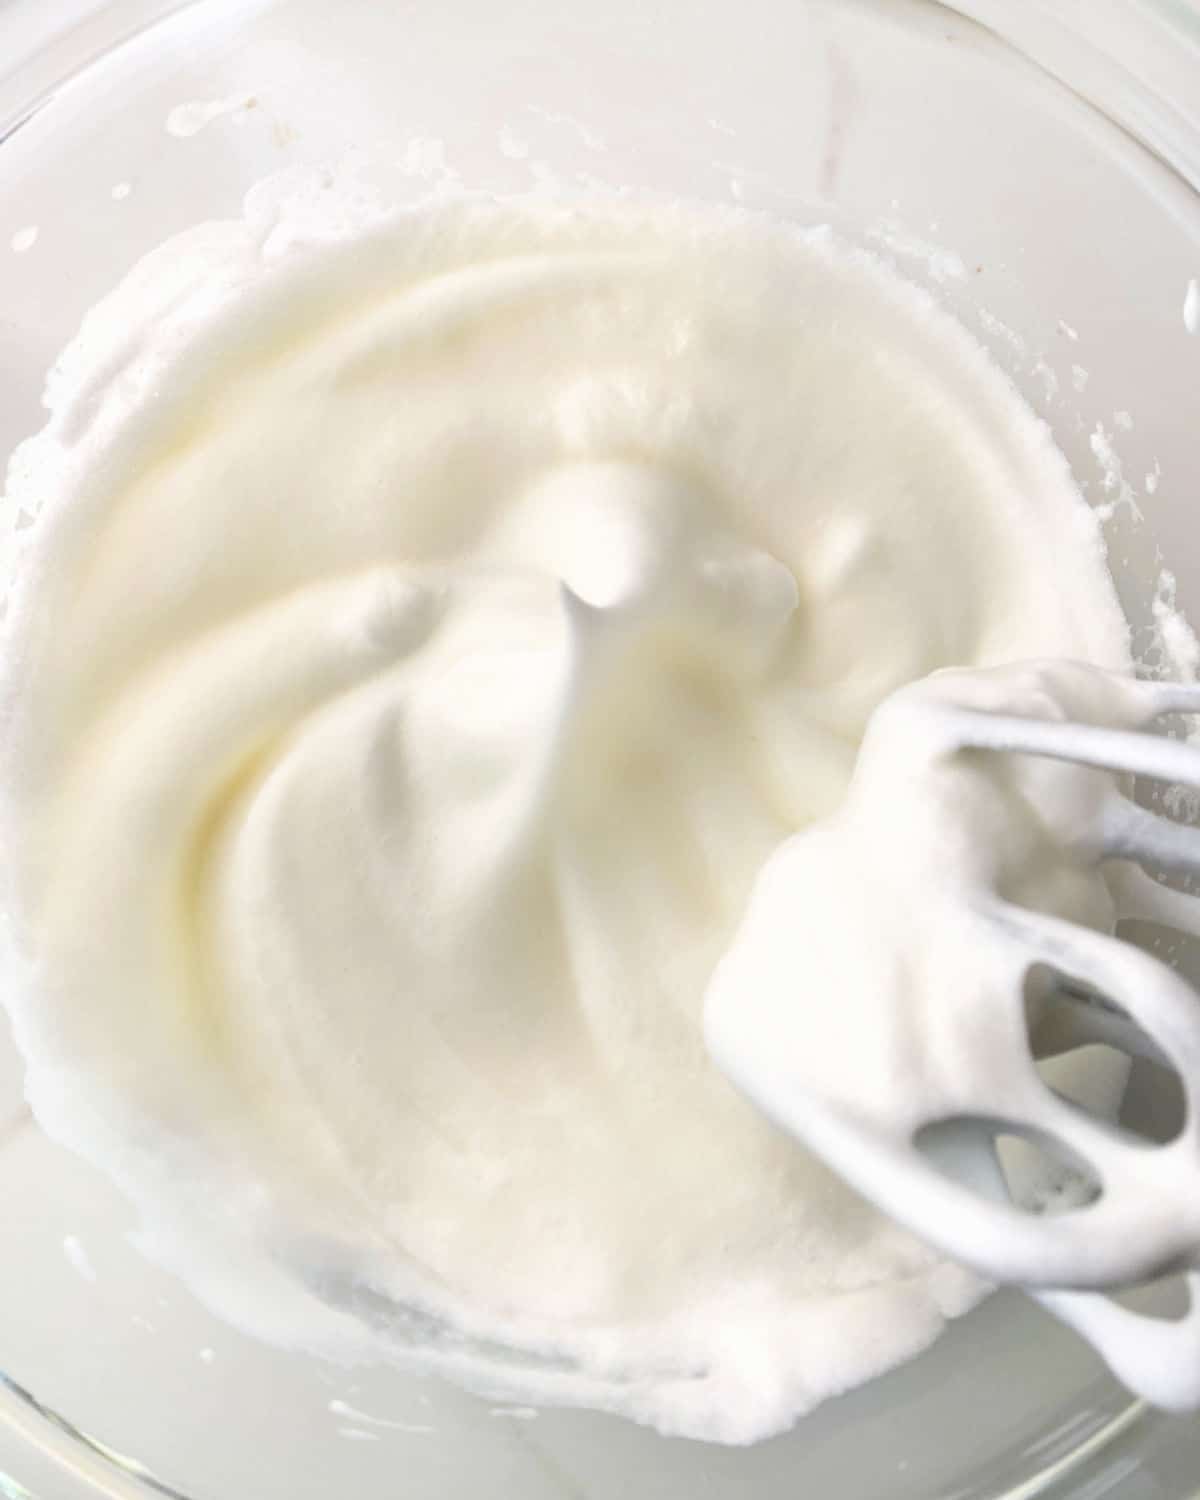 Egg whites beaten to stiff peaks with an electric mixer in a glass bowl. White surface.